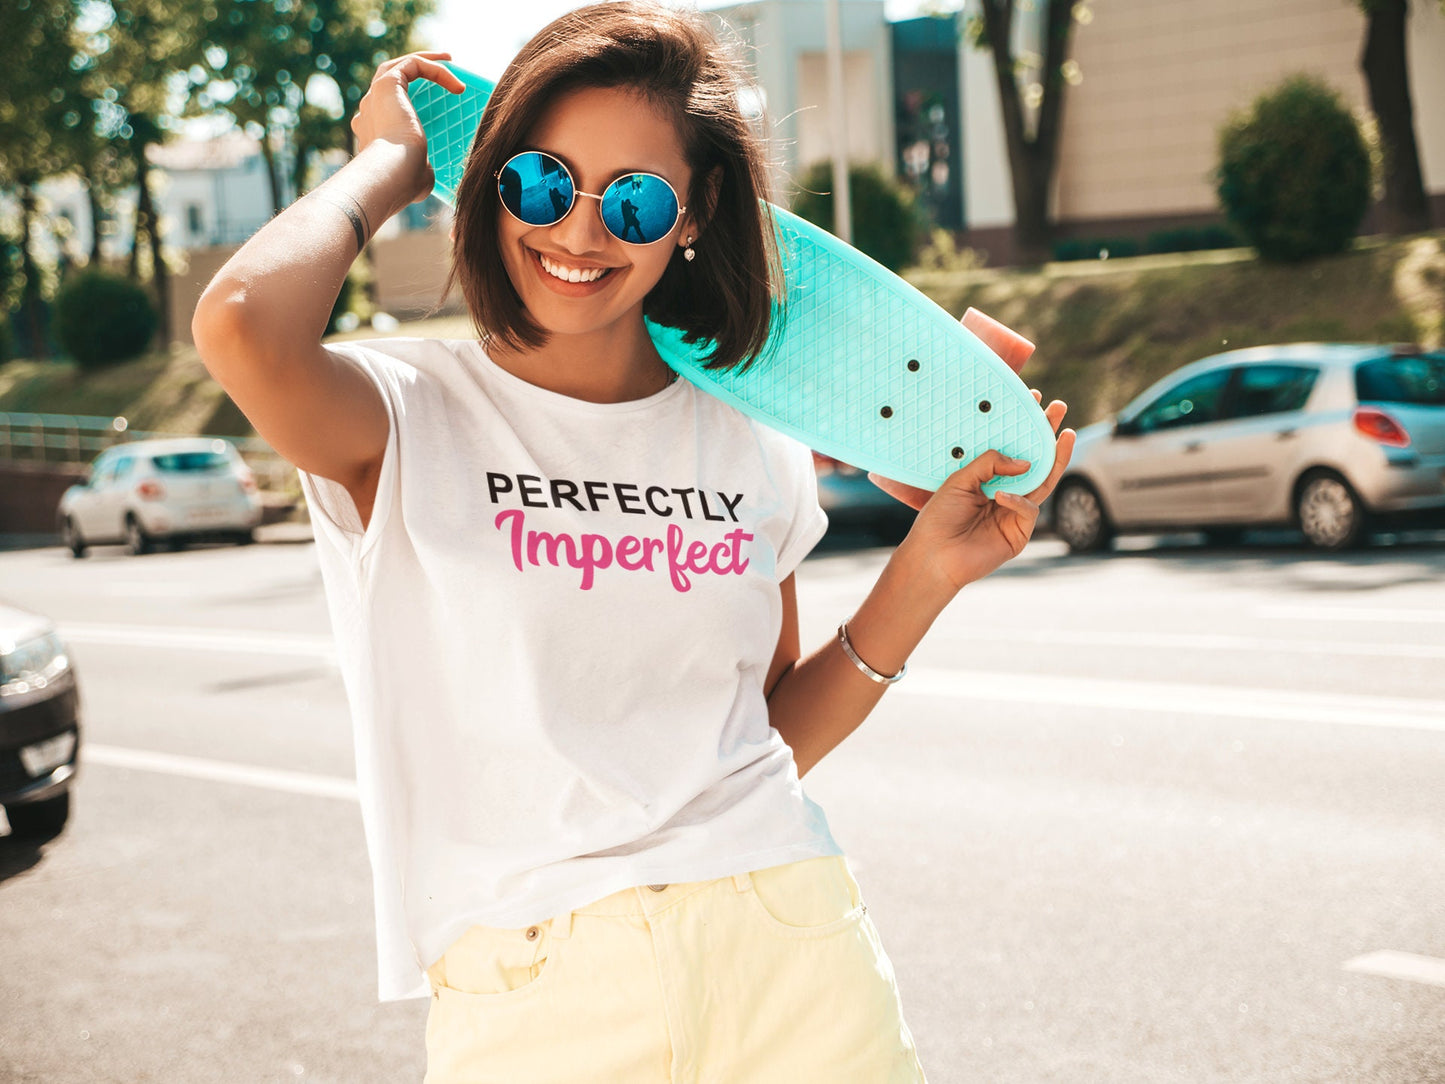 Perfectly Imperfect , Perfect Shirt, Imperfection Shirt, Motivational Shirt, Inspirational Shirt, Faith Shirt, Christian Shirt, Worthy Shirt